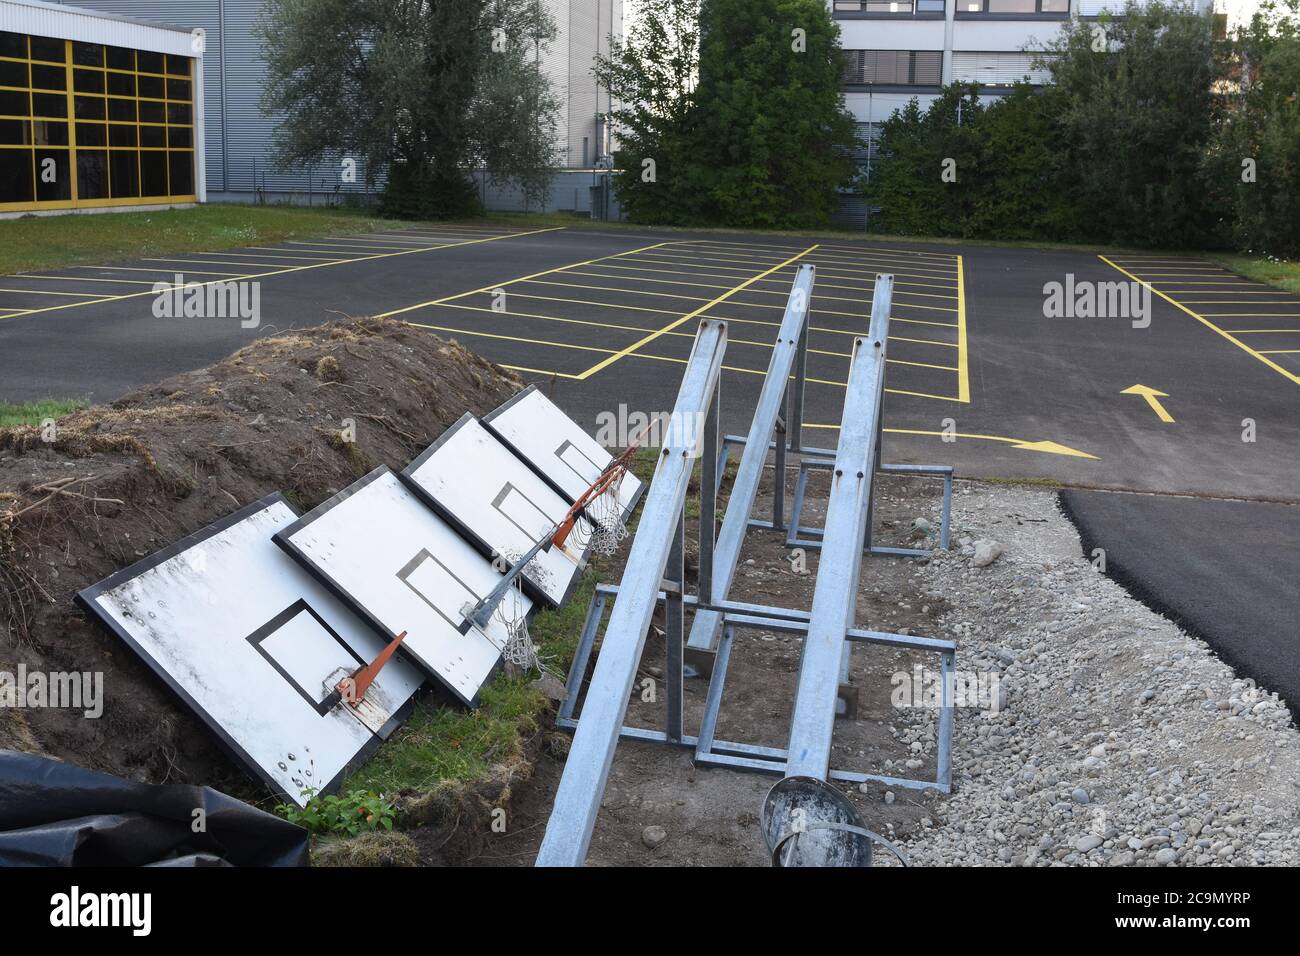 Basketball stands dismantled on a sport field due to collective sport collapse since coronavirus crisis. Social distancing and other prevention. Stock Photo